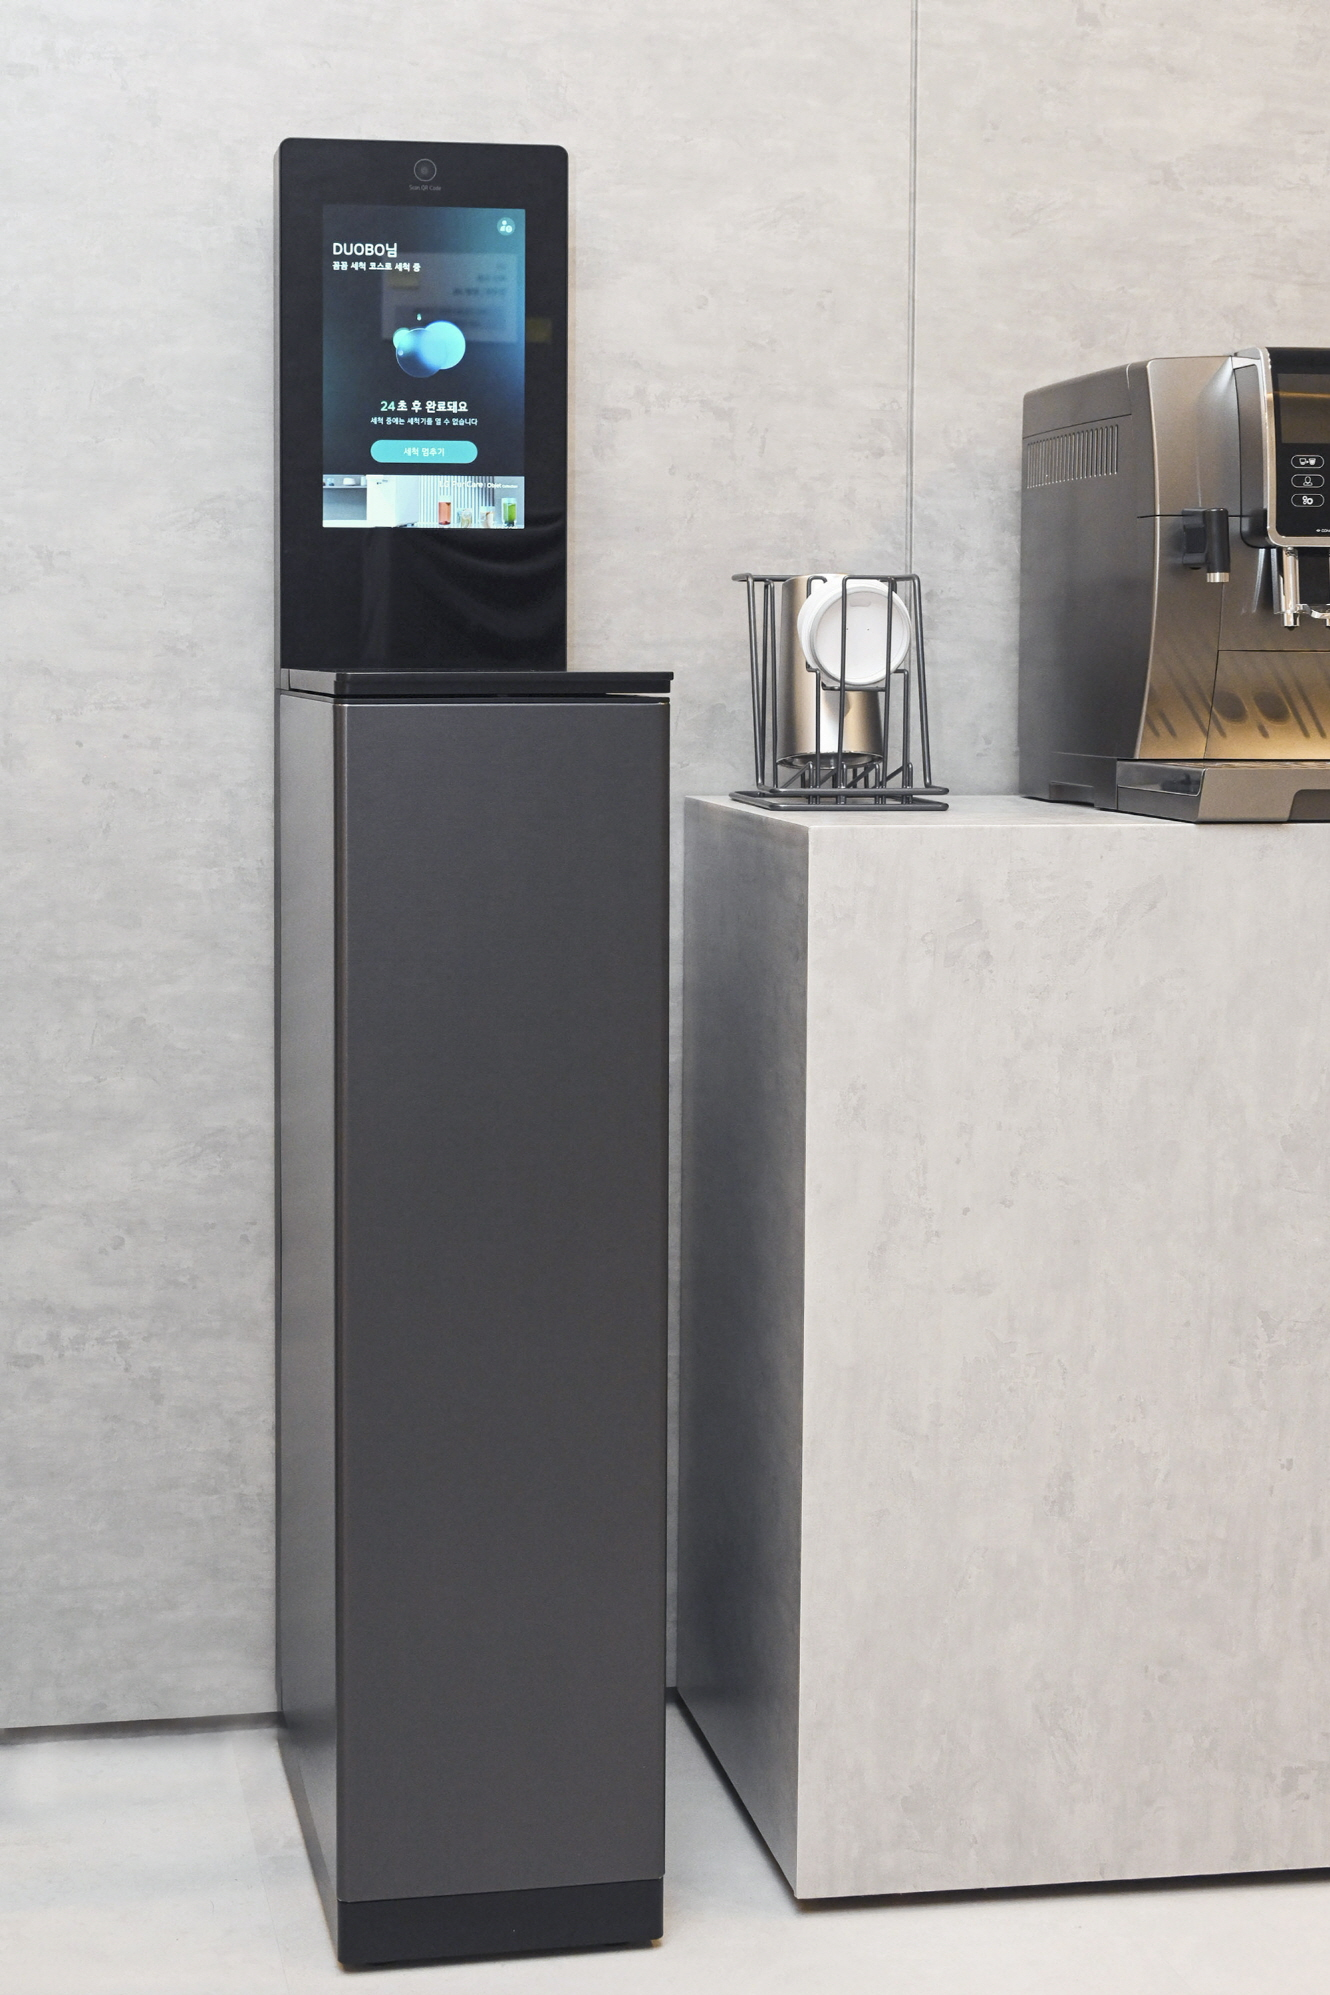 A photo of the LG mycup tumbler washer set up in an area